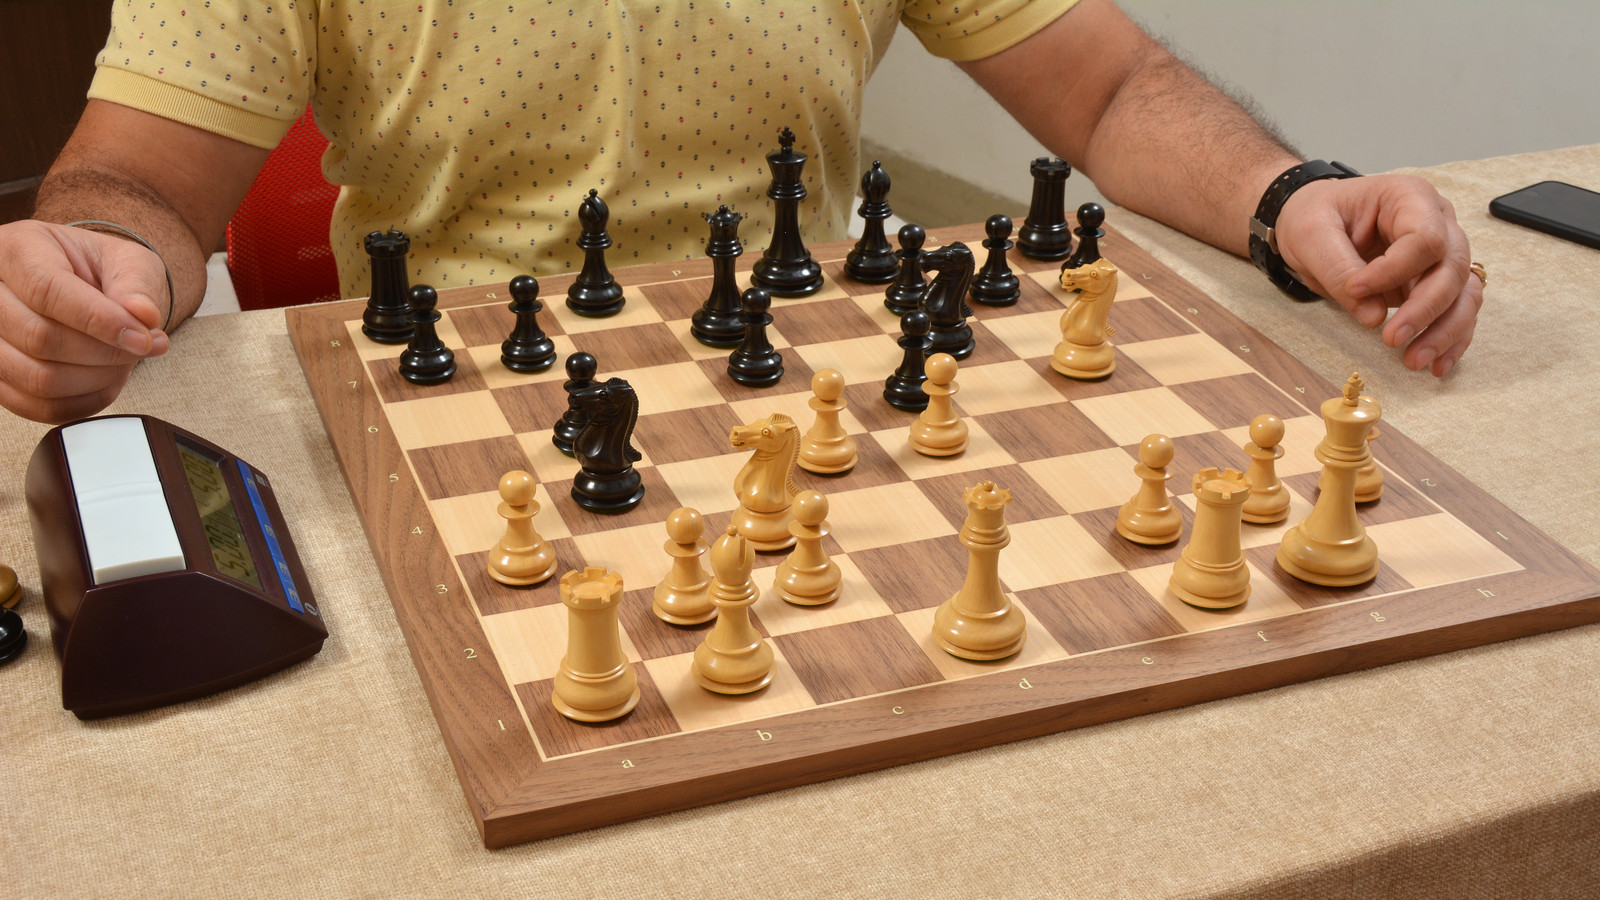 Foresight on the chess board